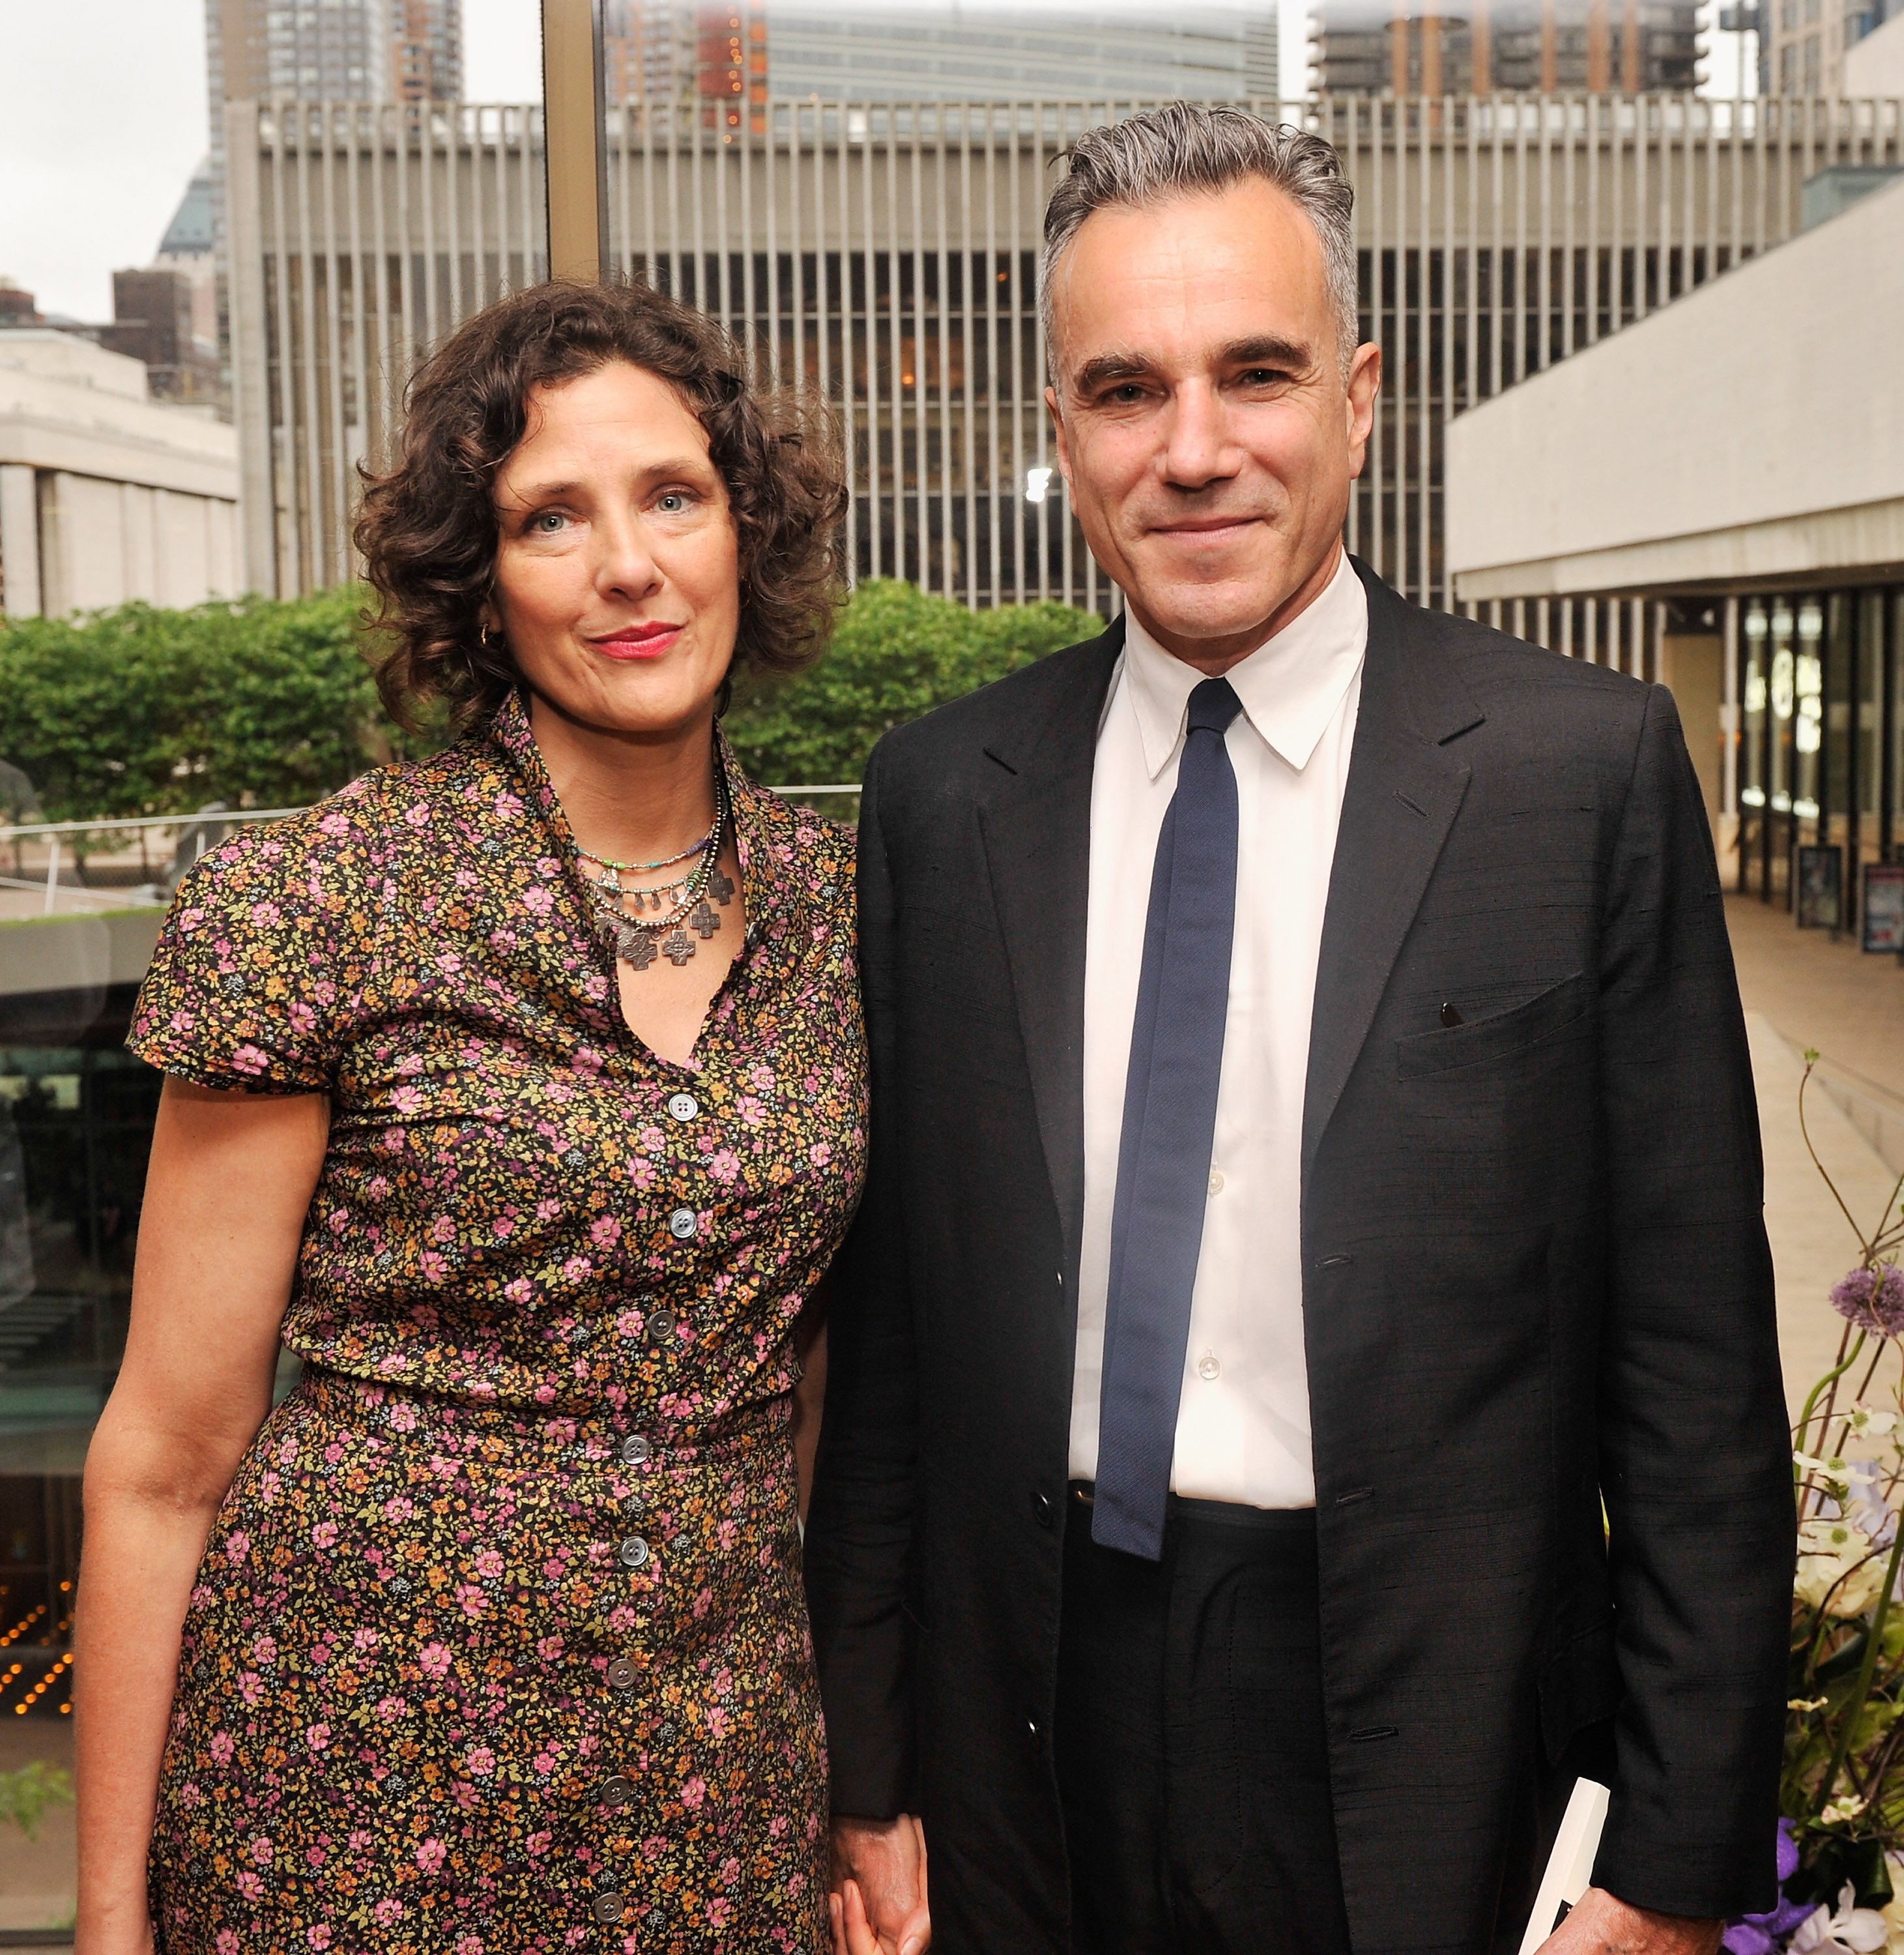 Rebecca Miller and Daniel Day-Lewis at Juilliard's 108th Commencement Ceremony on May 24, 2013, in New York City. | Source: Getty Images